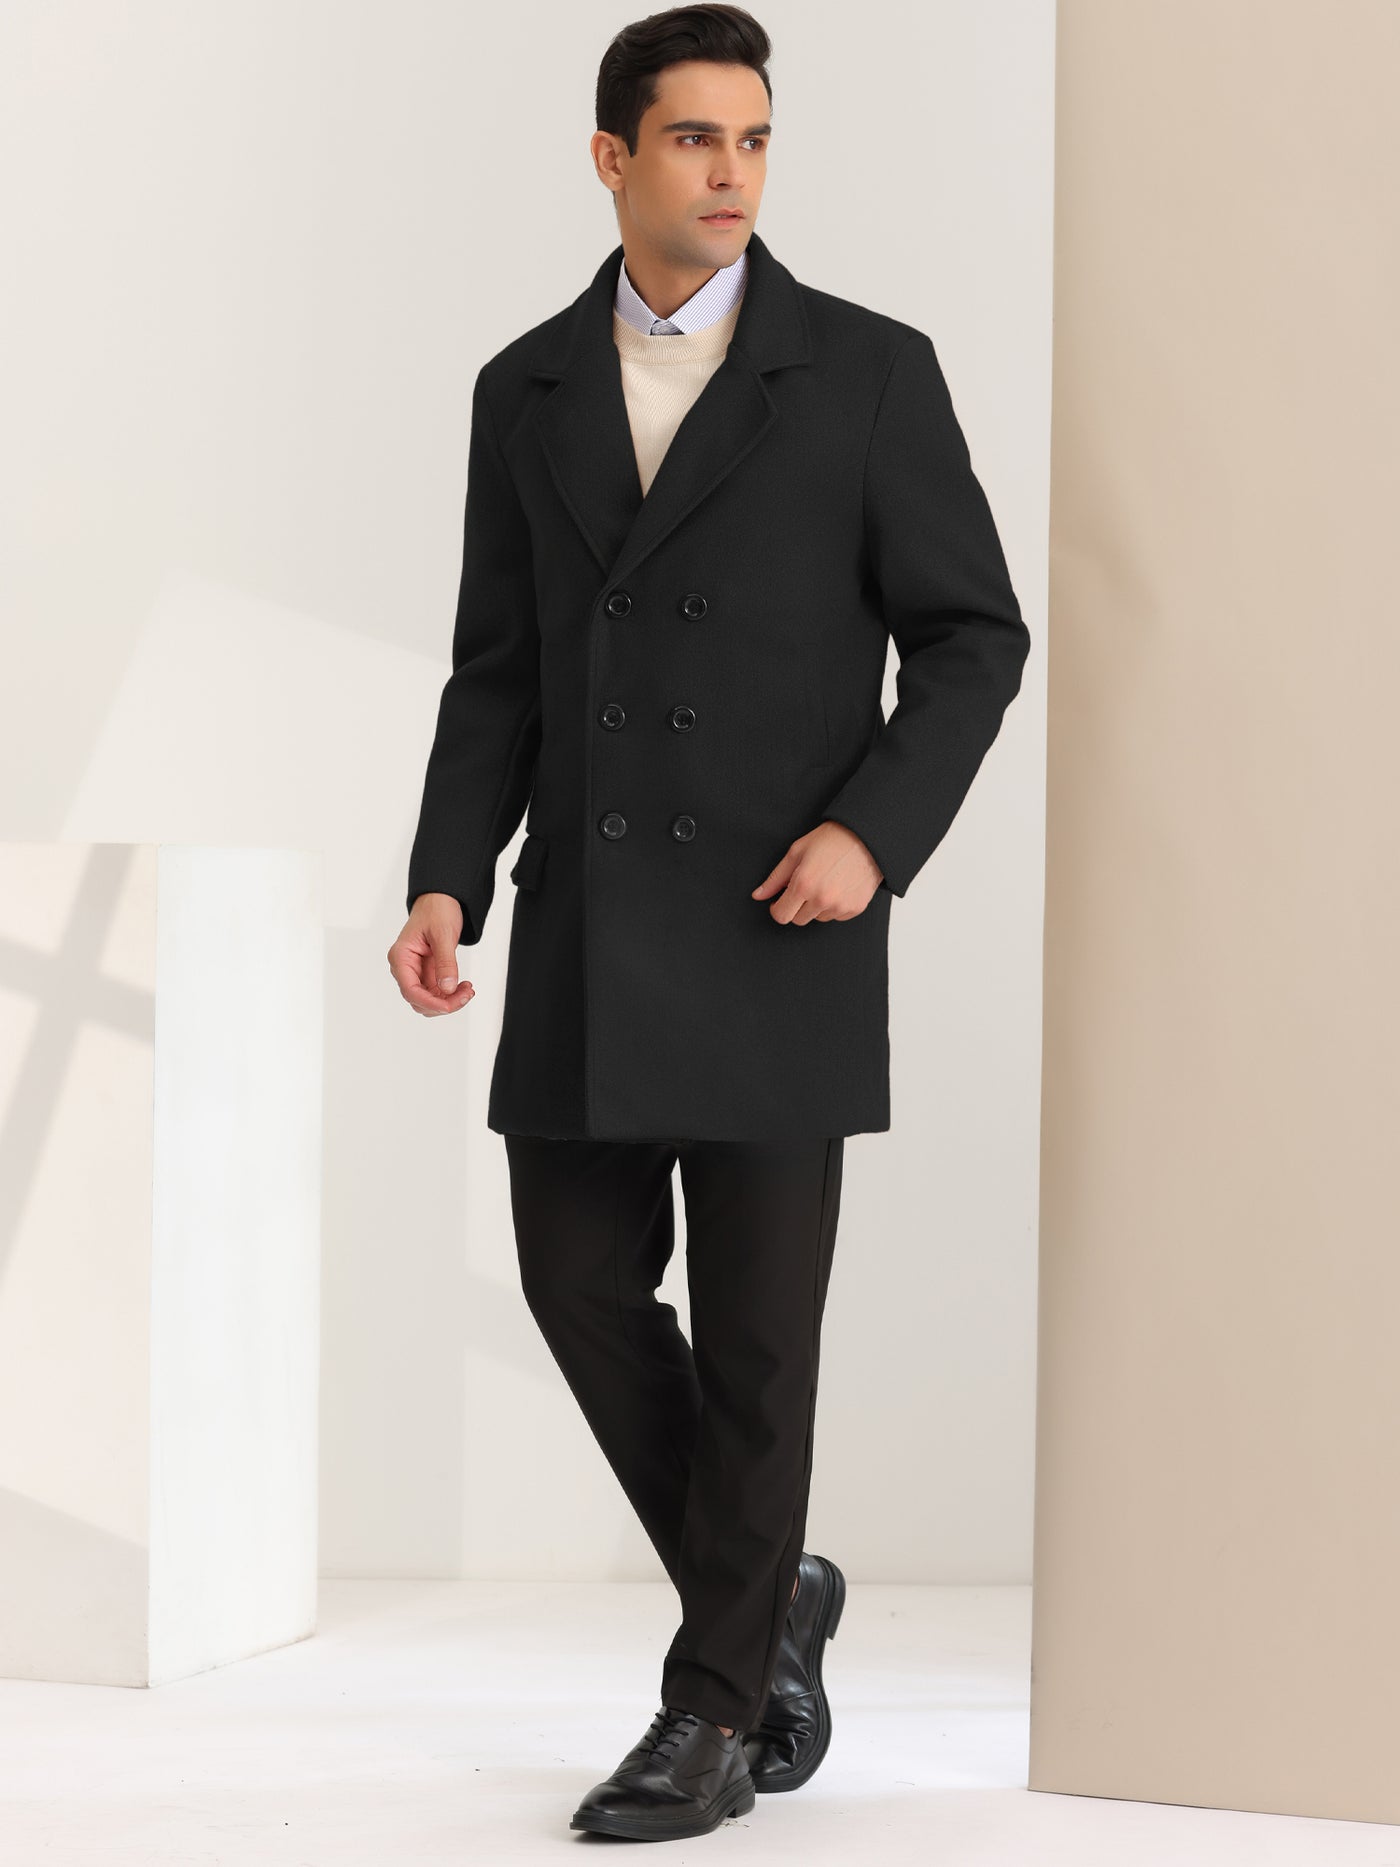 Bublédon Men's Winter Overcoat Double Breasted Notched Lapel Mid-Length Pea Coat